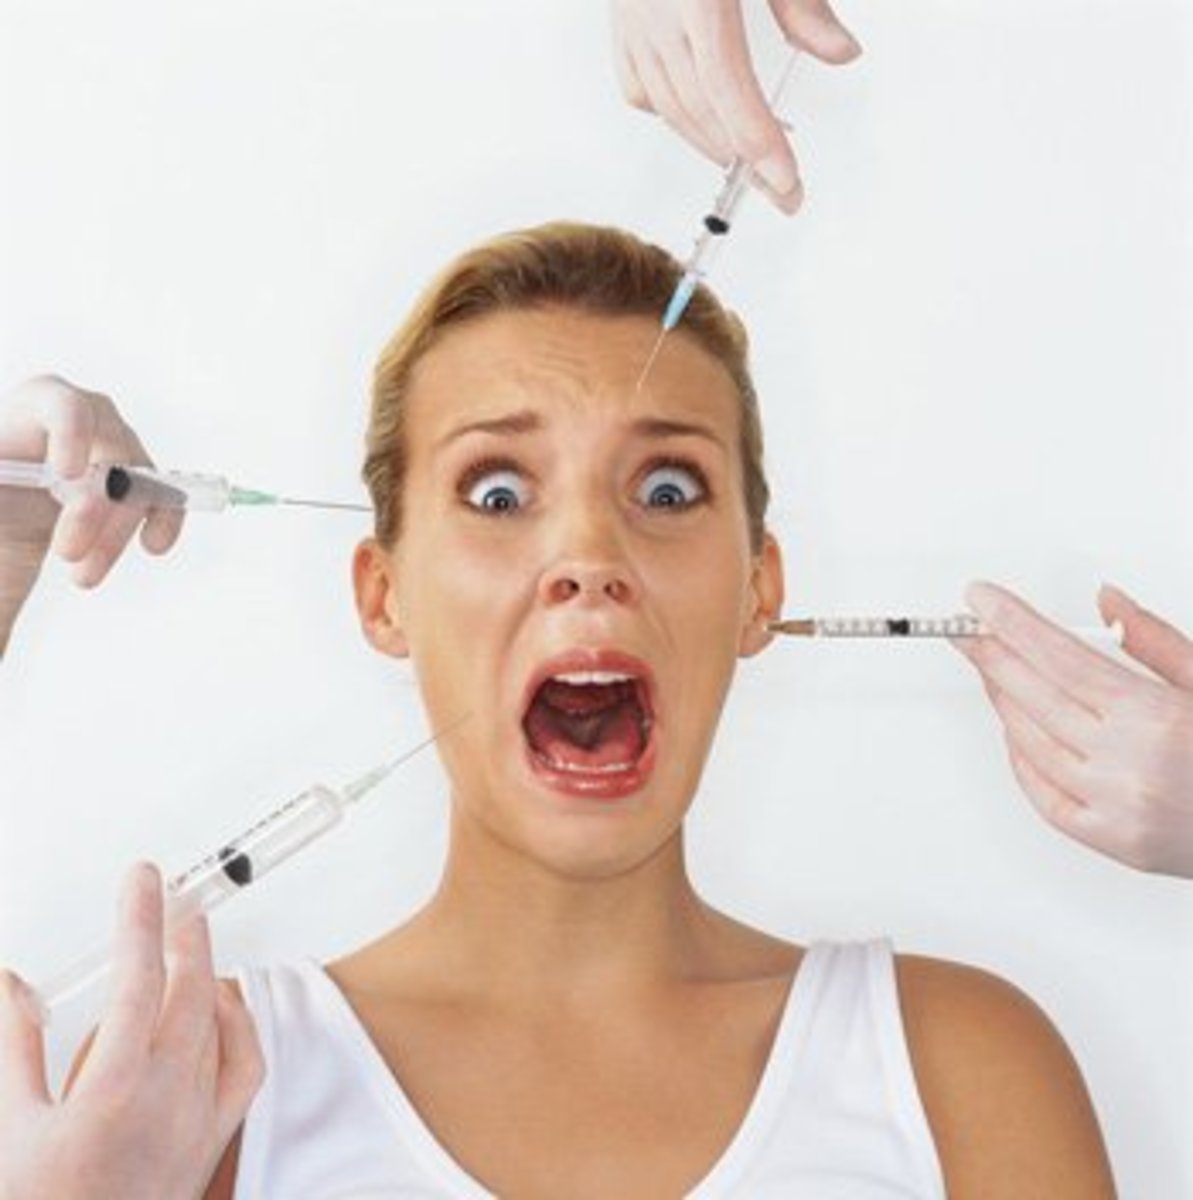 How painful is Botox?